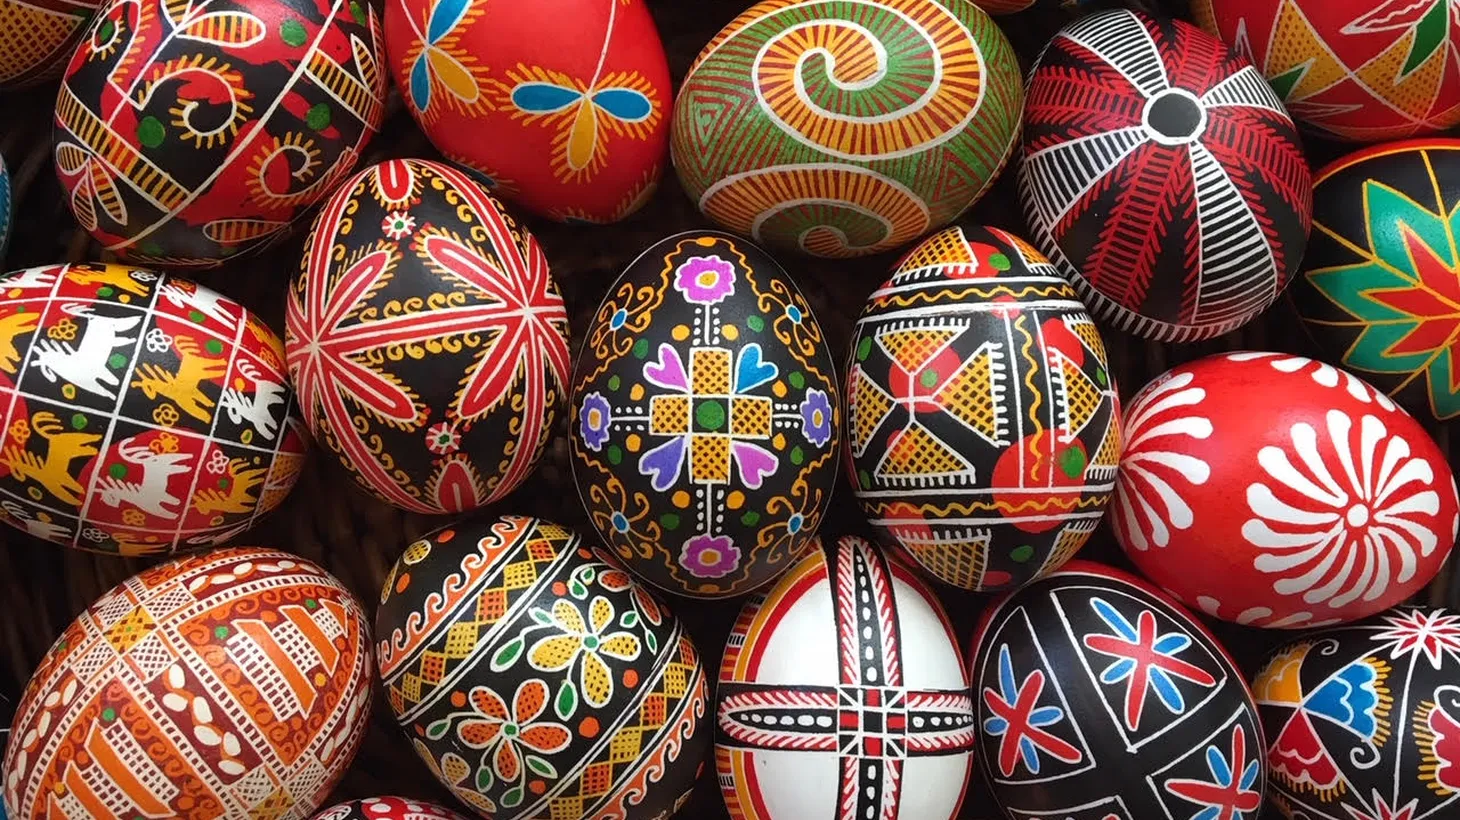 The Ukrainian art of egg decorating dates back over 1,000 years with traditions and stories behind each design.